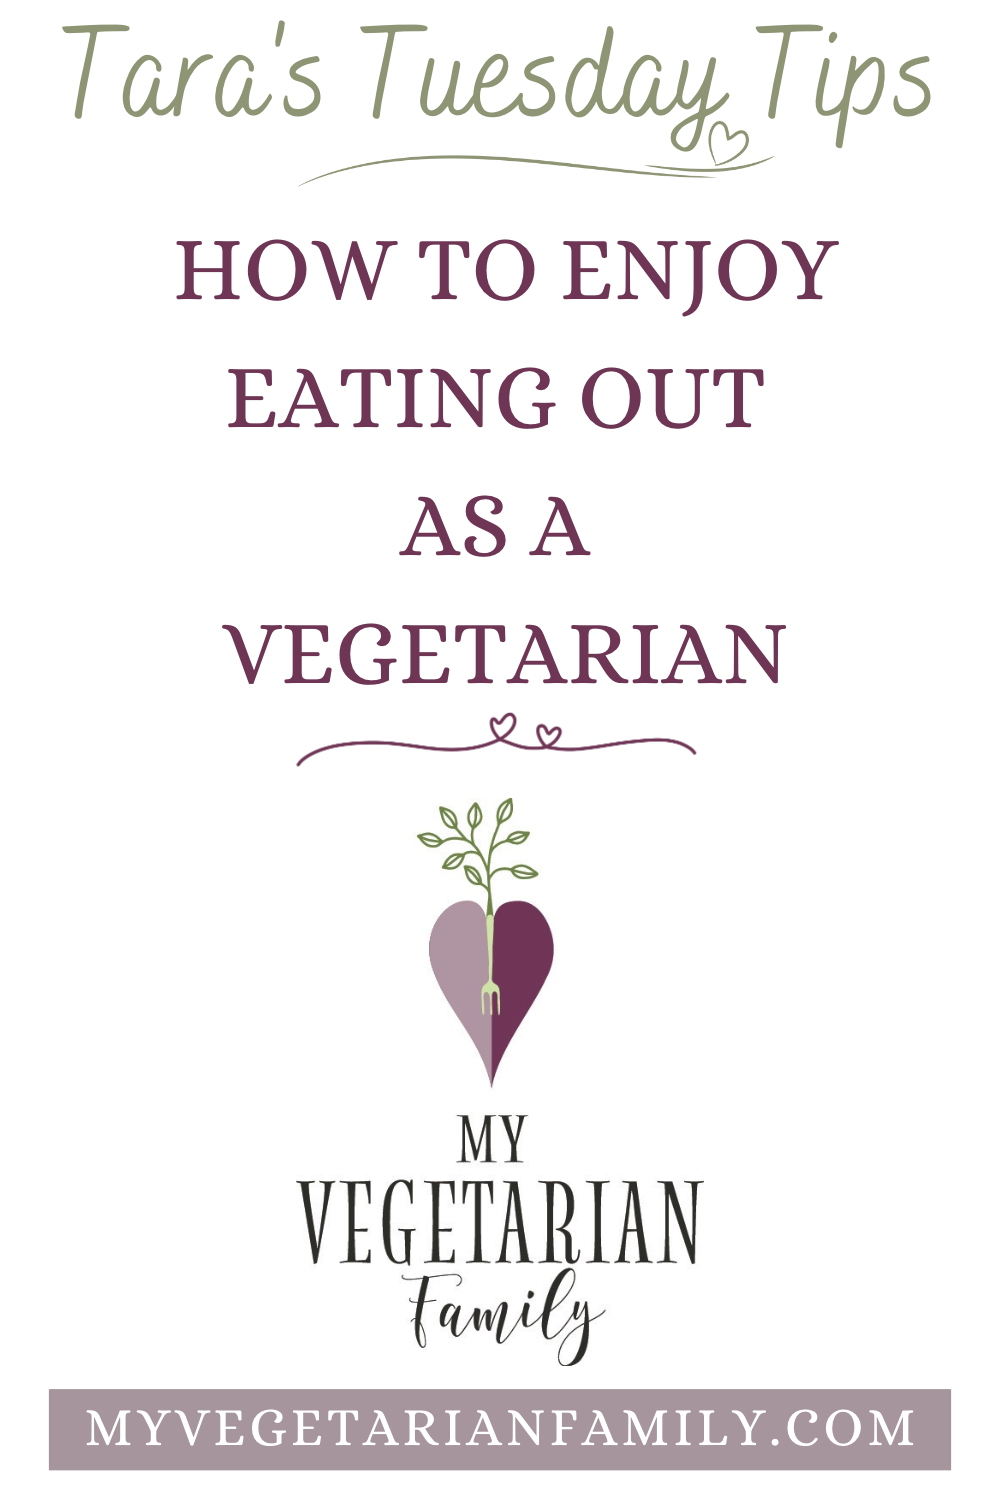 How To Enjoy Eating Out As a Vegetarian | My Vegetarian Family | Tara's Tuesday Tips #vegetarineatingout